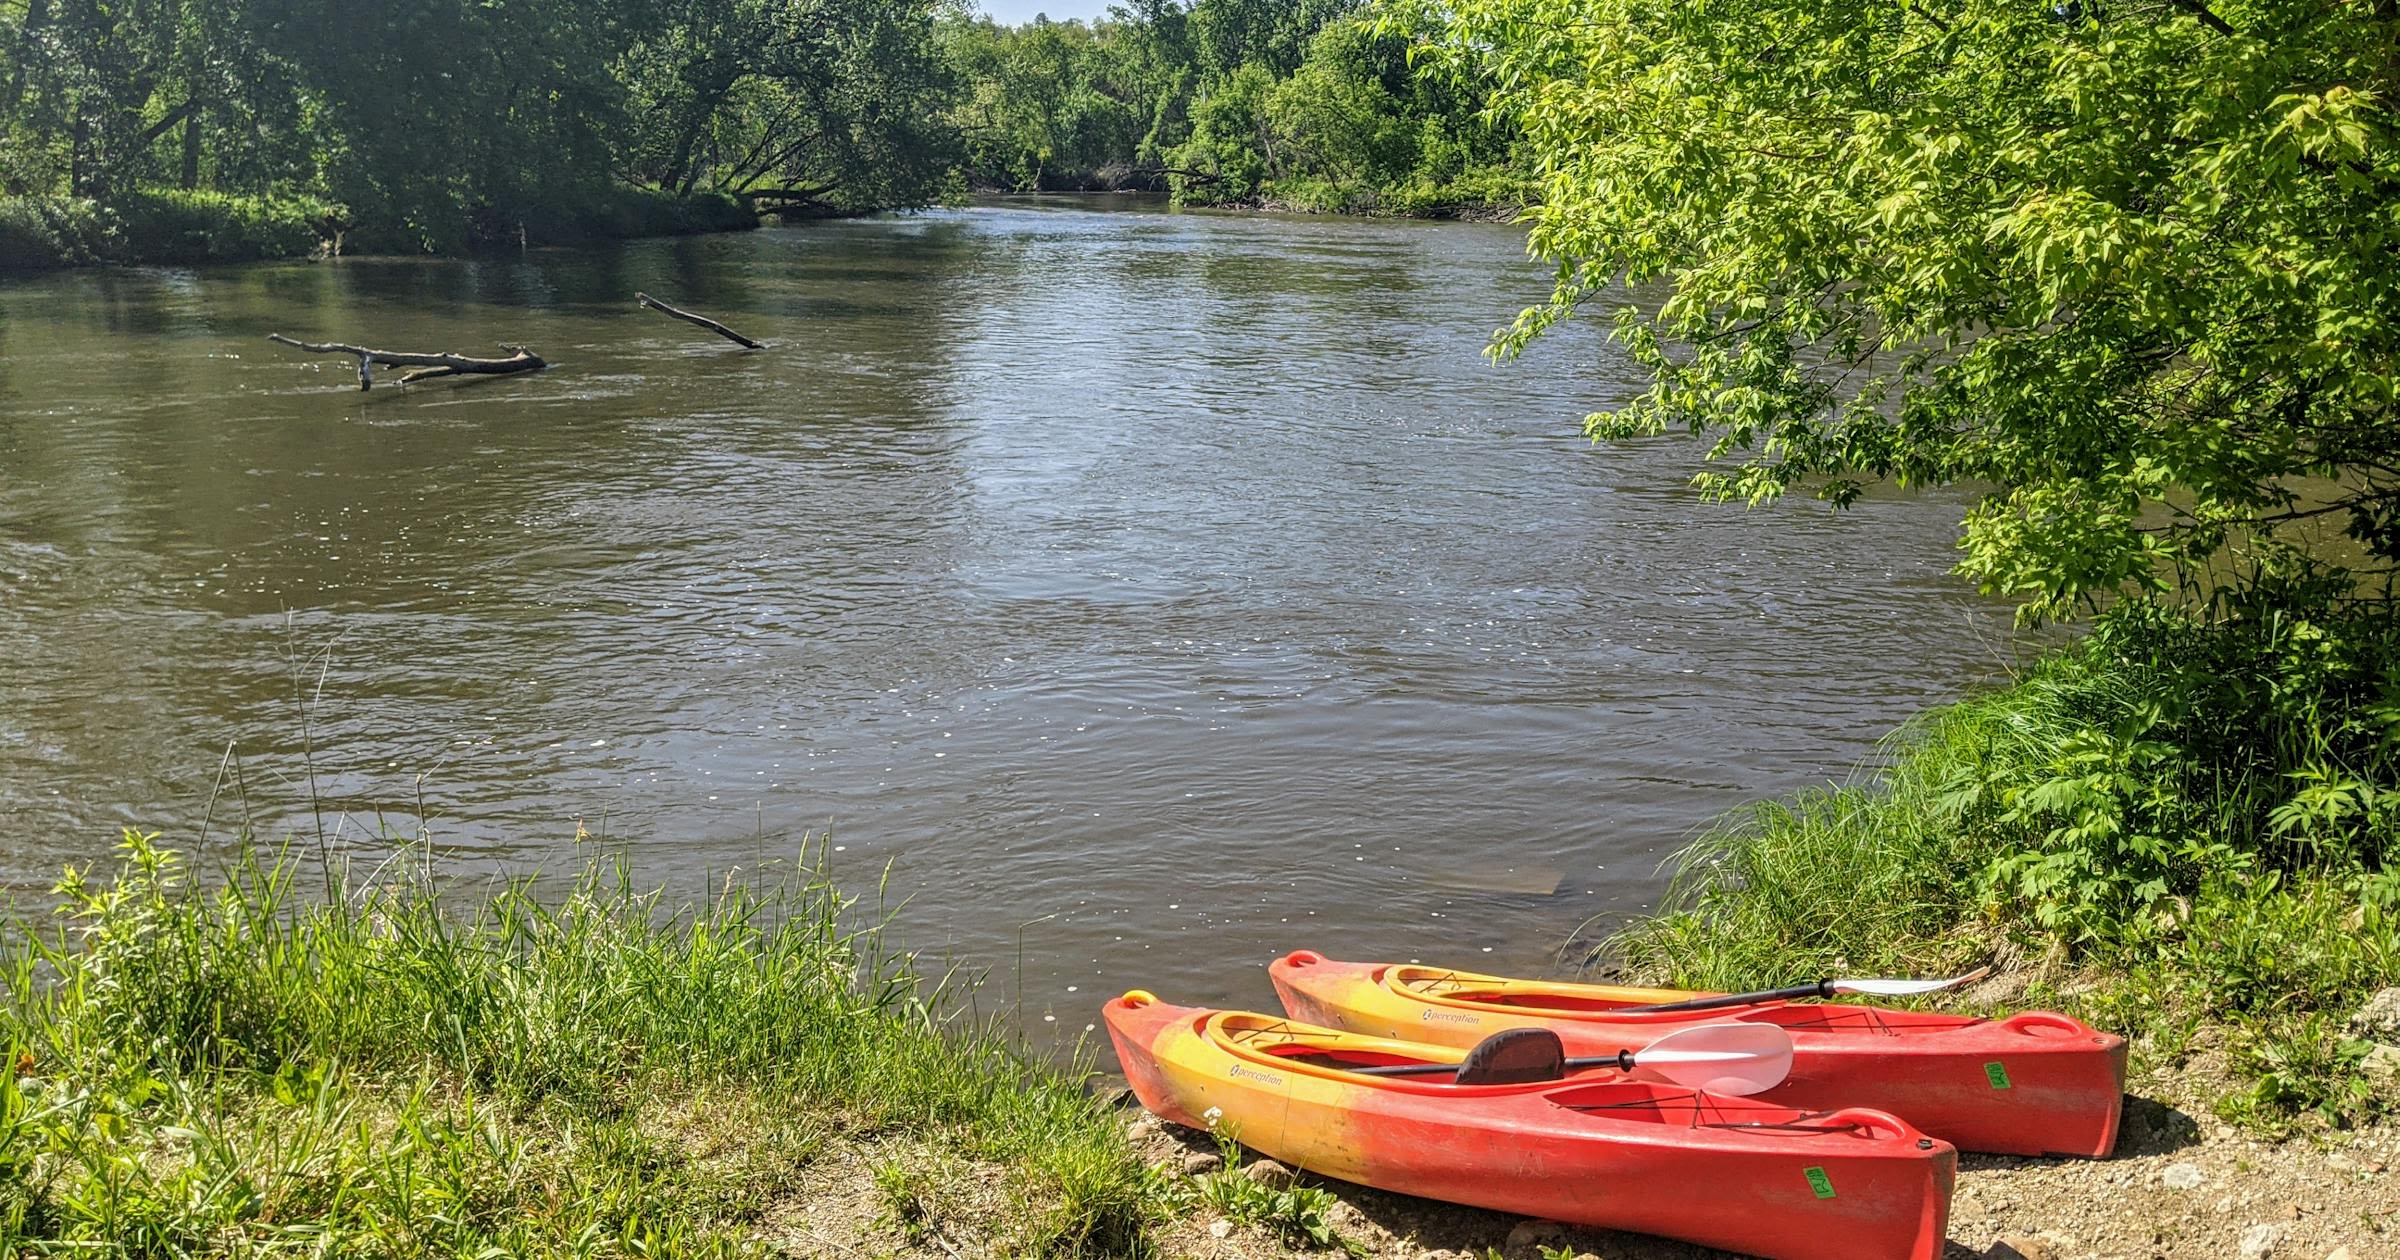 Want to go paddling or tubing on a river this July 4 weekend? Check the water levels